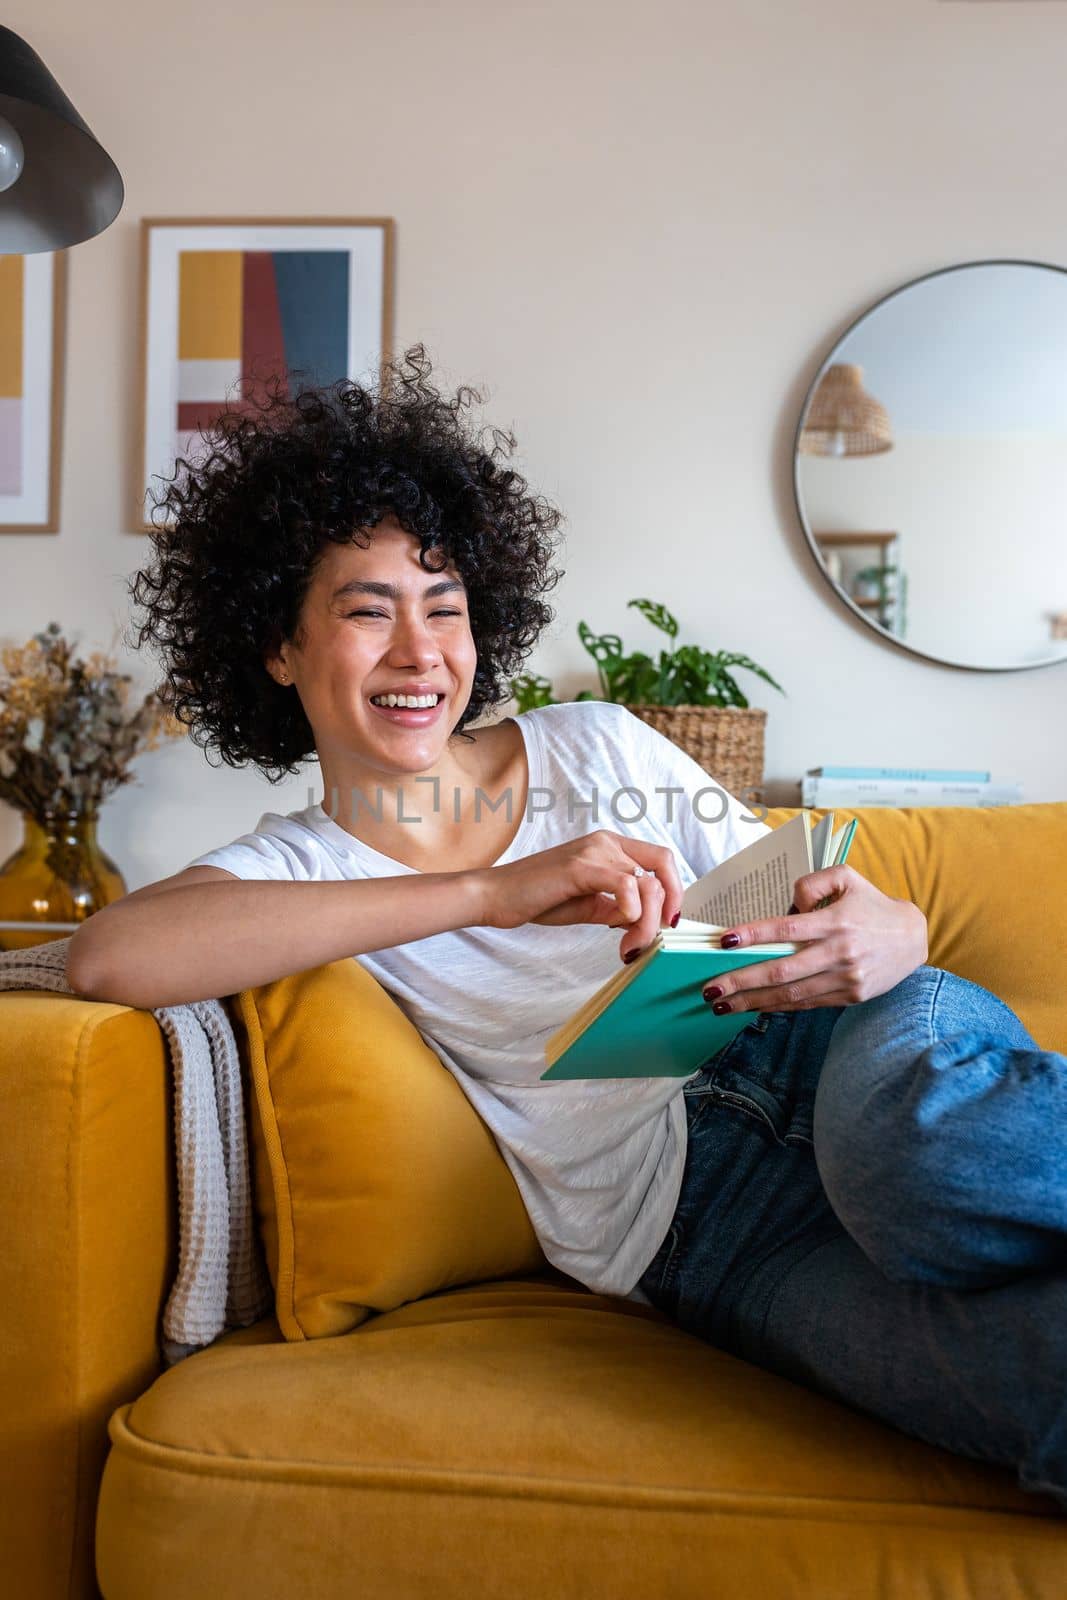 Portrait of happy, smiling African American woman relaxing at home reading a book sitting on the couch looking at camera. Vertical image. Lifestyle concept.